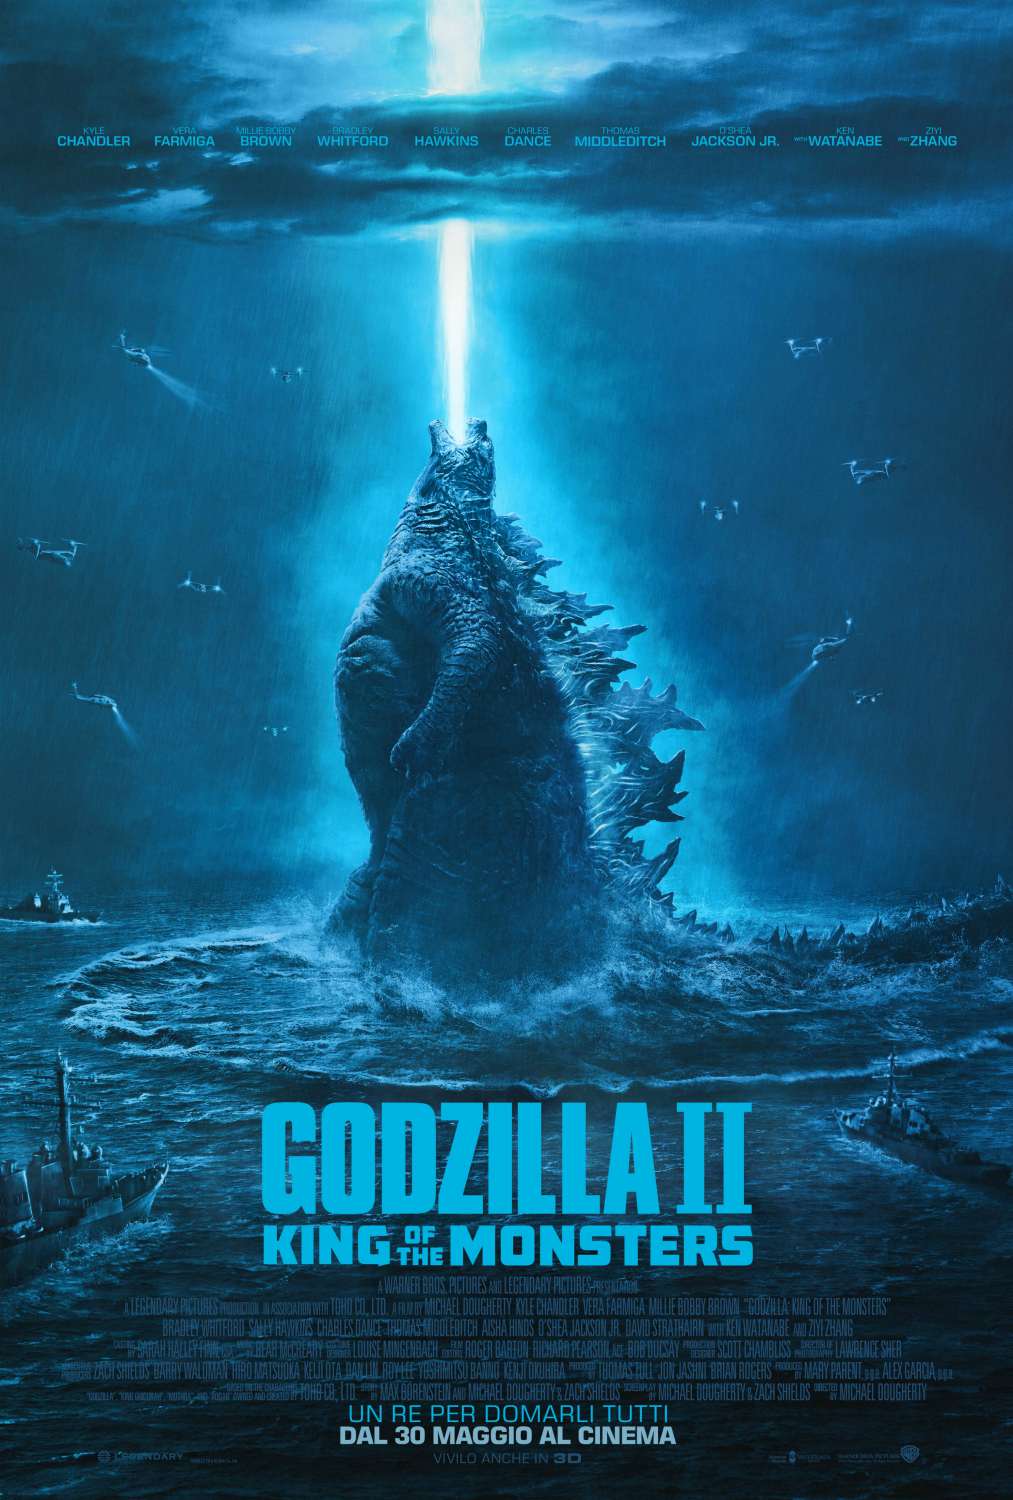 Godzilla: King of the Monsters (2019) Official Full Movie Free Online